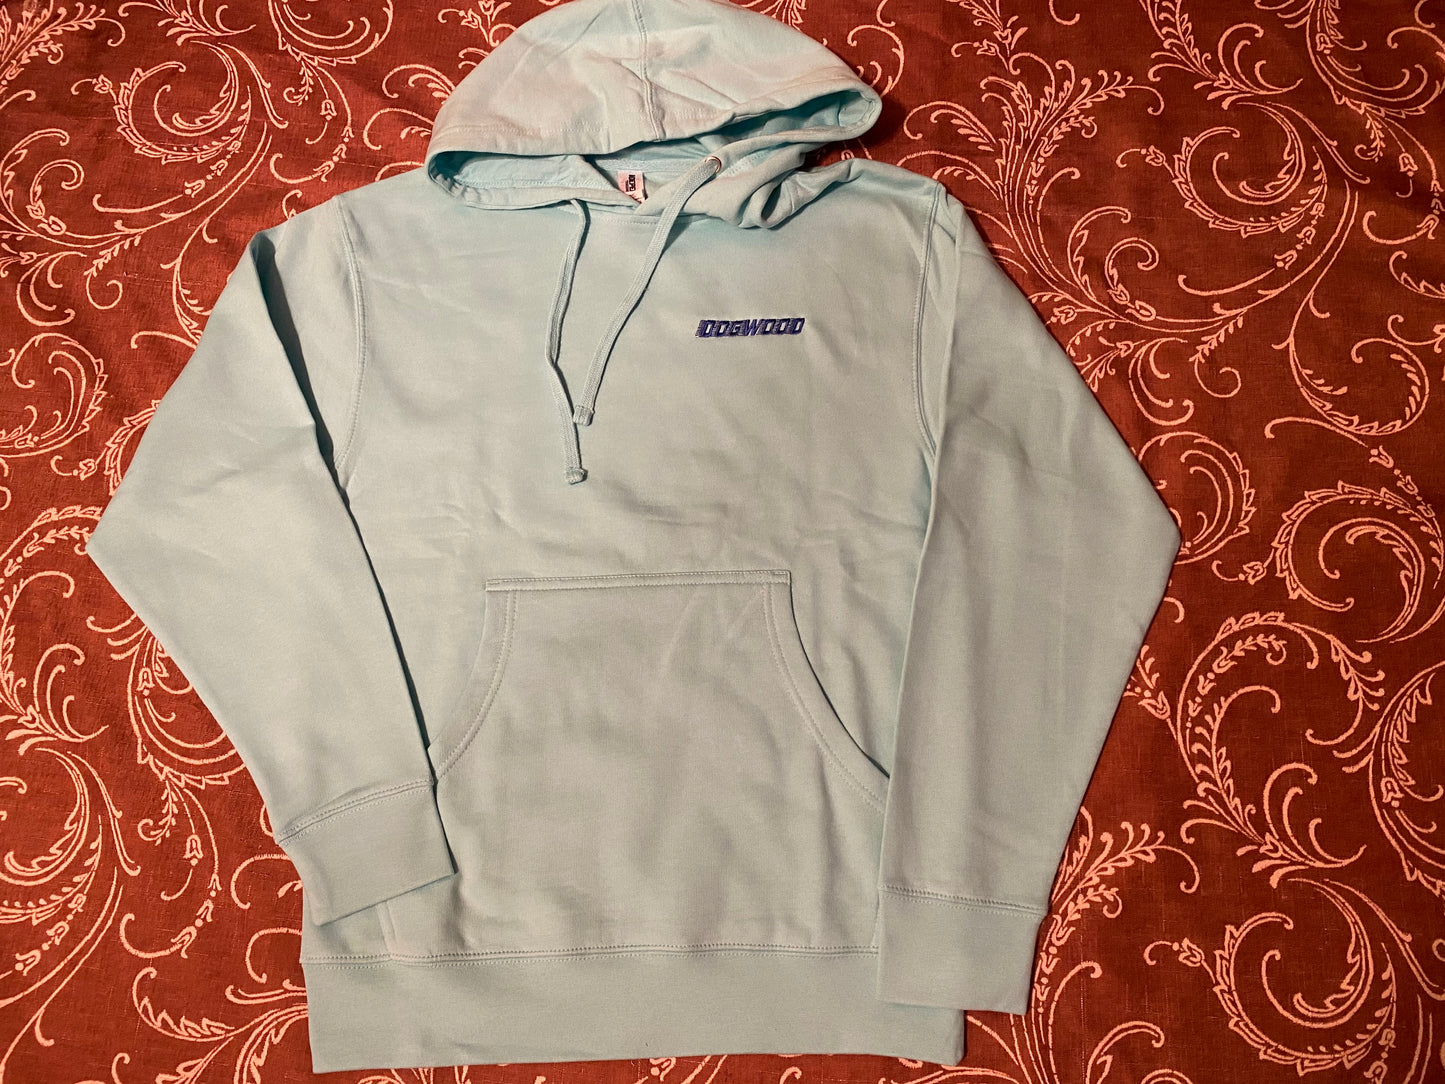 Speedwave Embroidered Pullover Hoodie Teal Blu (size options listed)